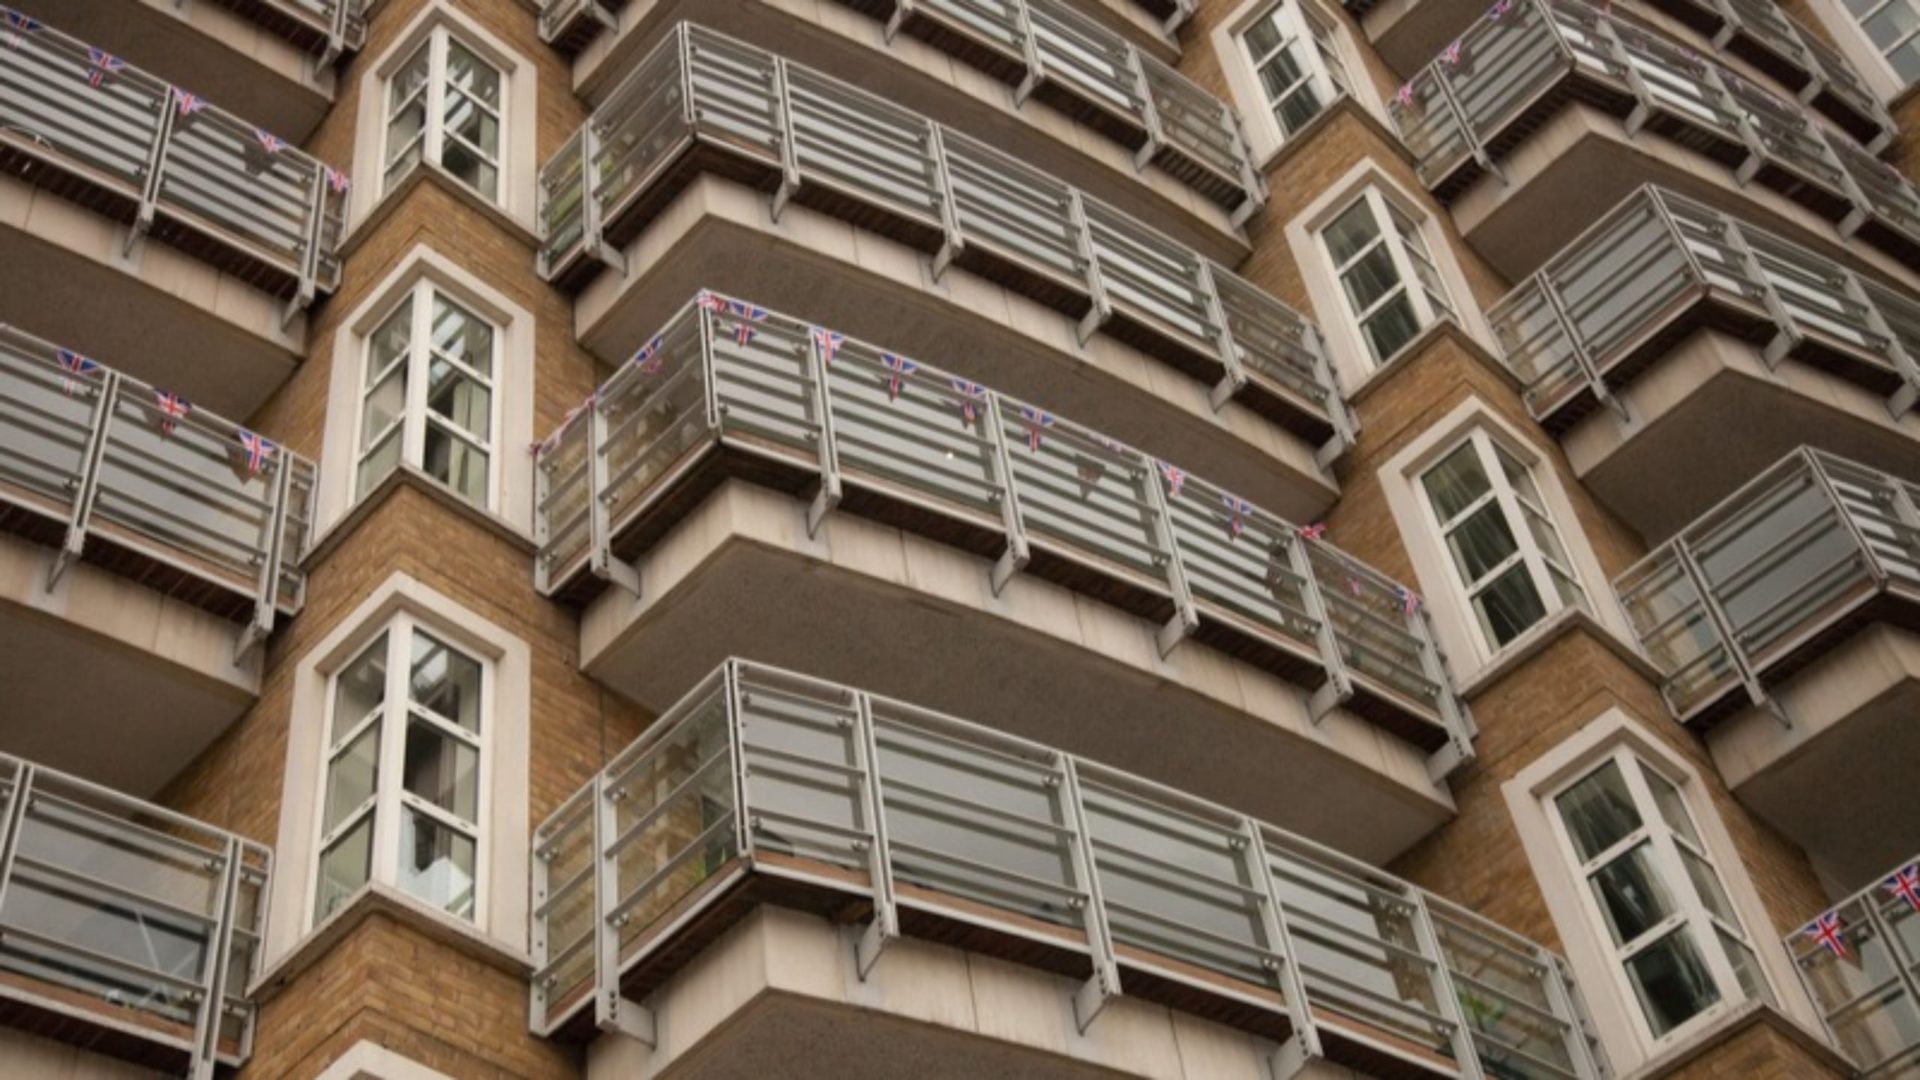 Building Safety Regulator A view of balconies and windows in a block of flats.